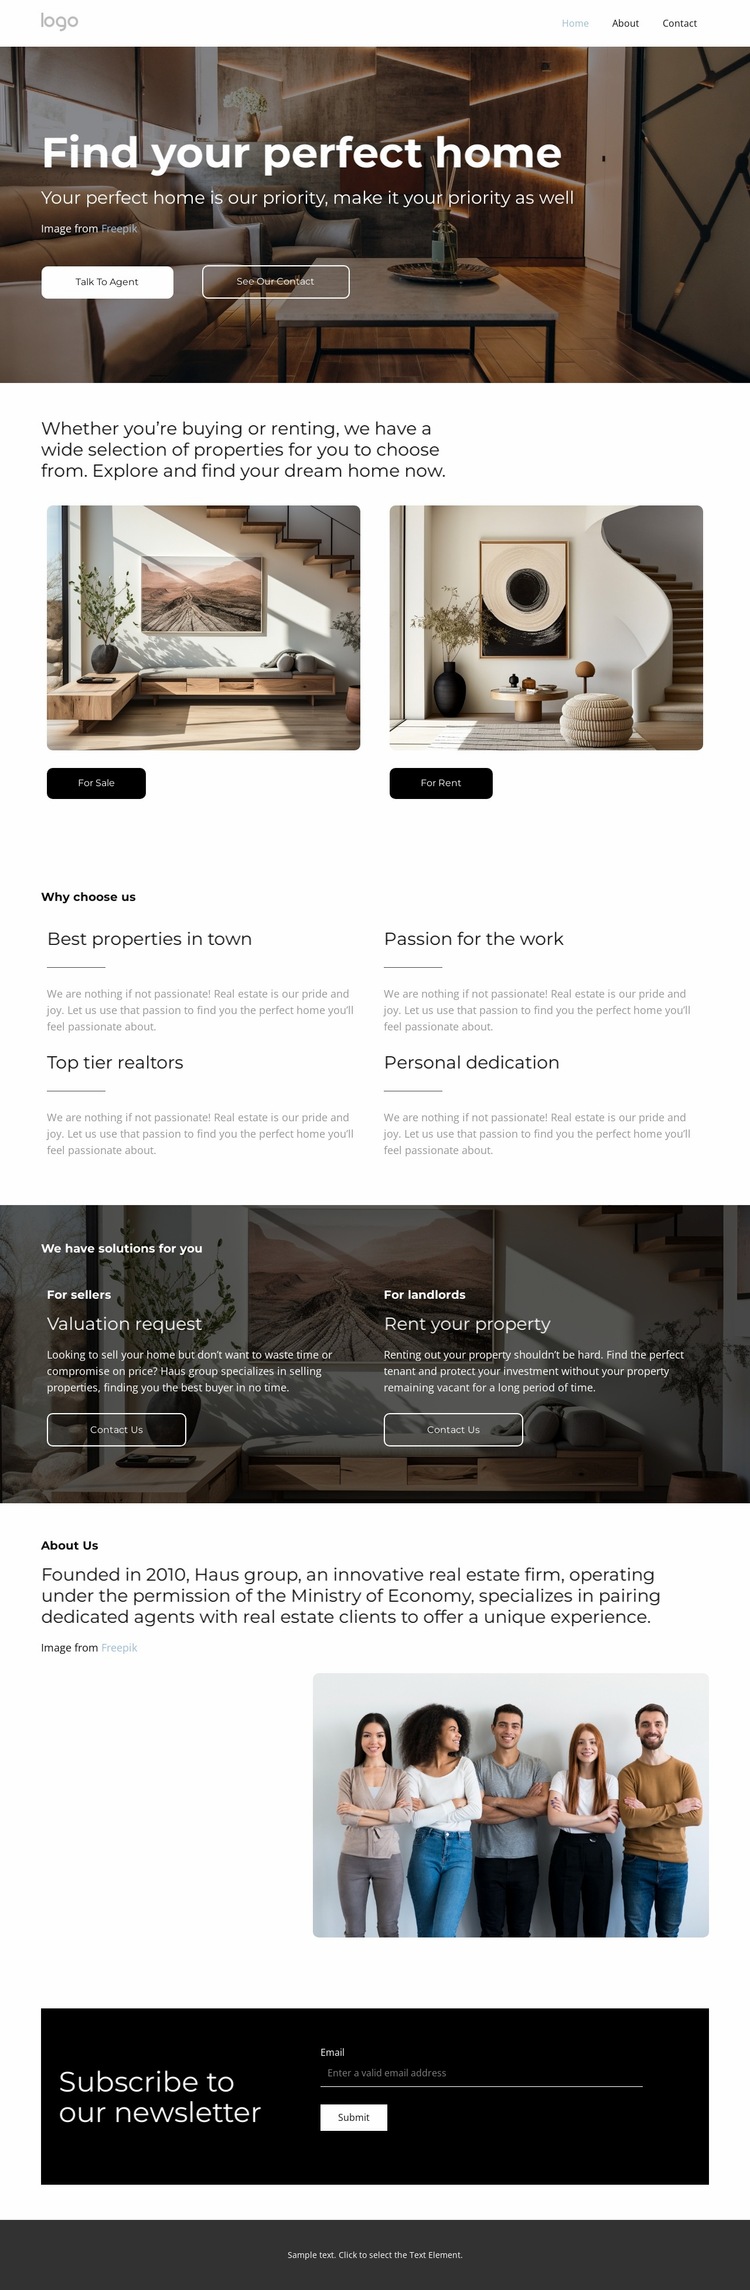 How to pack your stuff Website Builder Templates